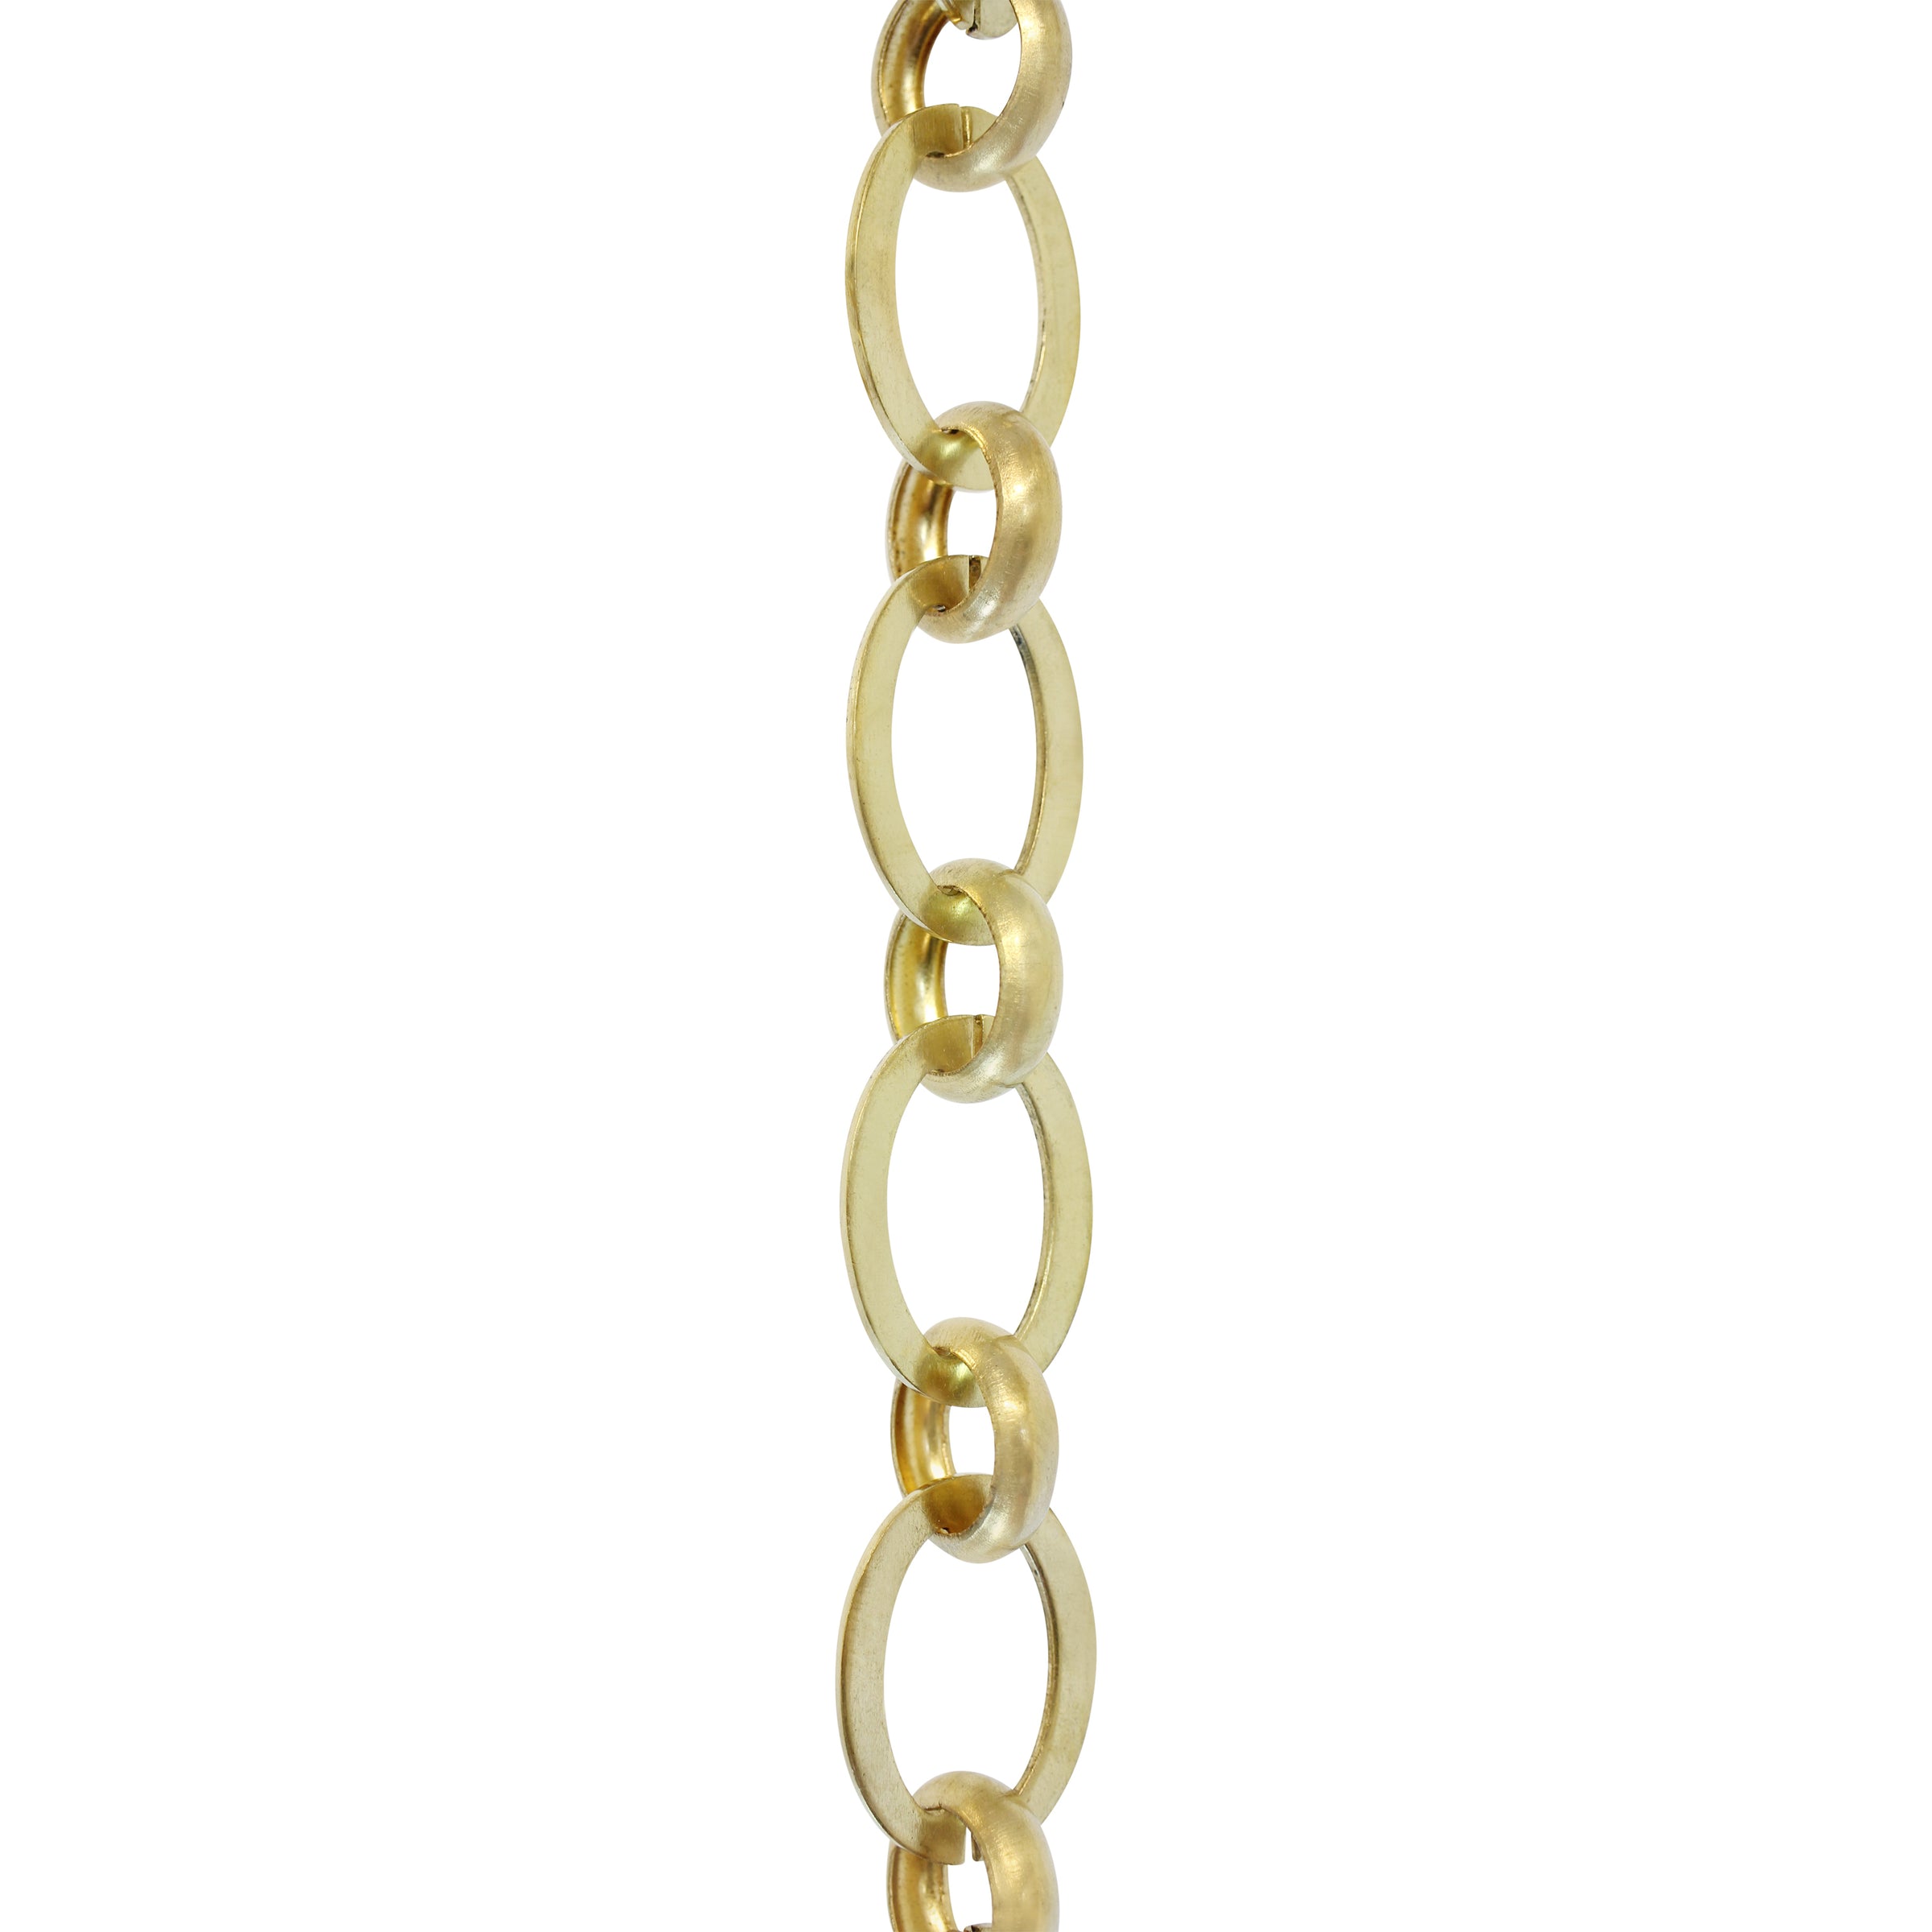 B8830 Antique Brass, Oval Chain, Solid Brass-LL (36 length)